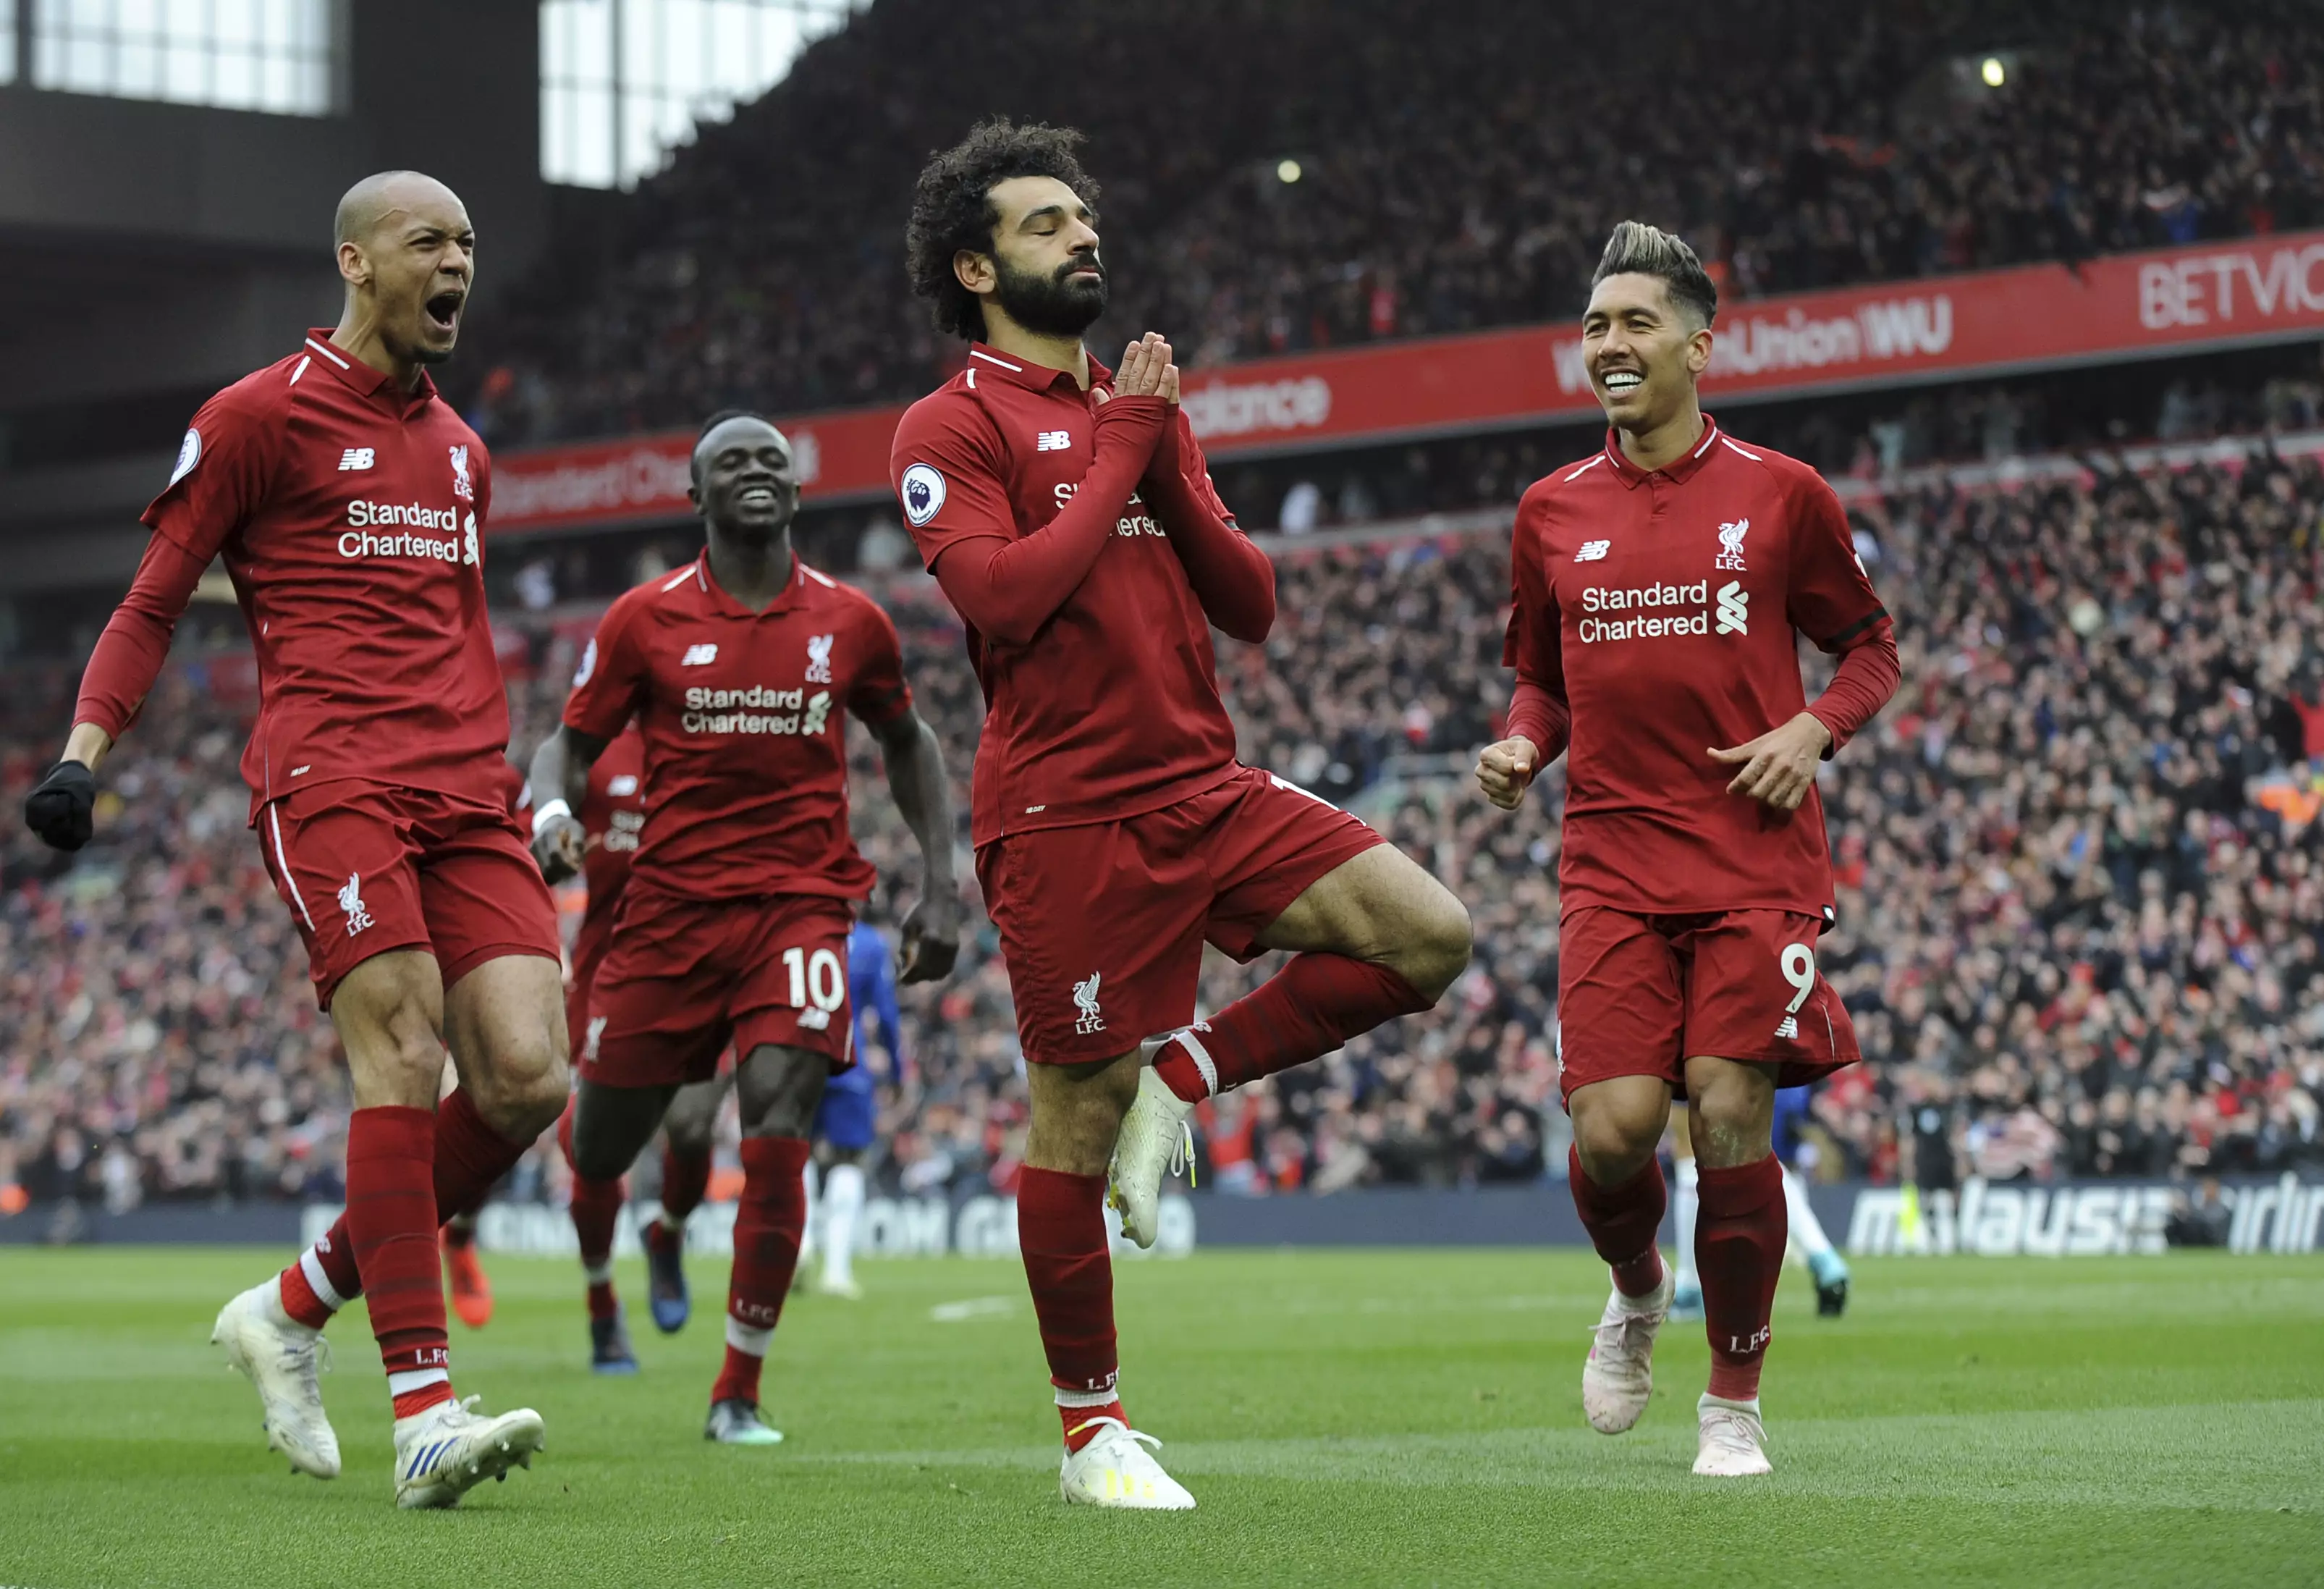 Mo Salah's goal earned Liverpool three points against Chelsea. Image: PA Images